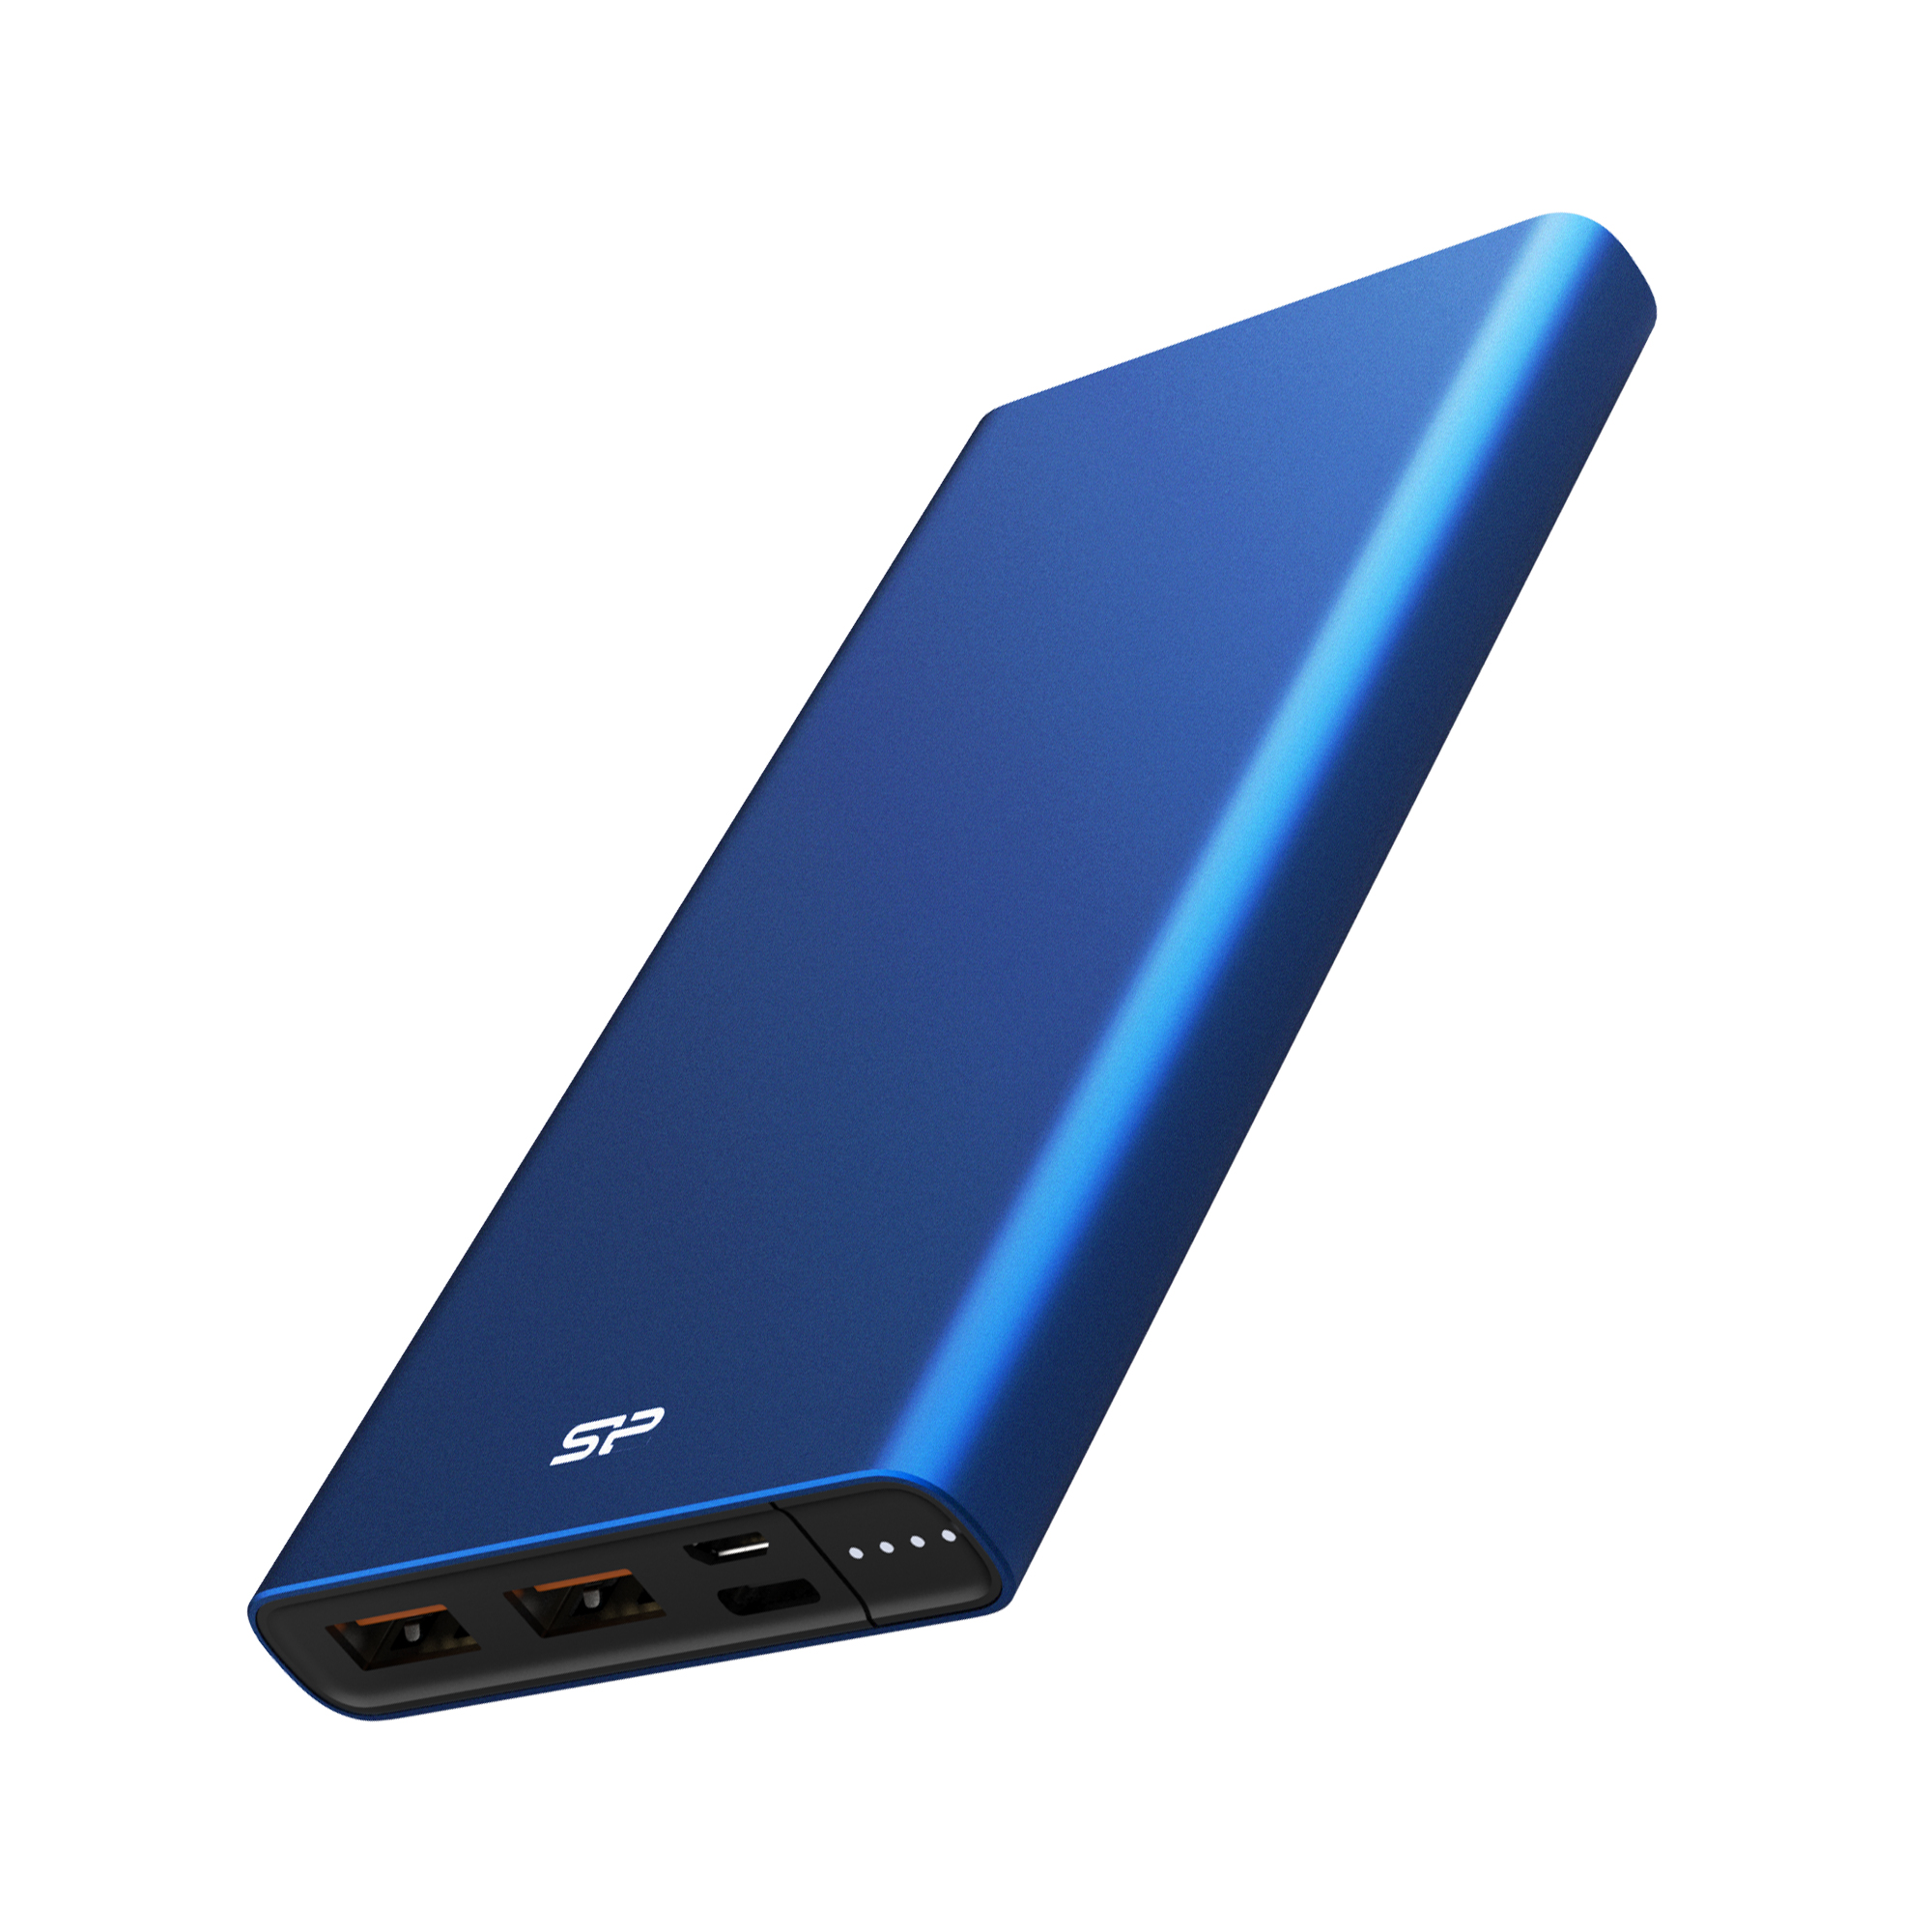 Silicon Power QP60 10000mAh 18W PD & Quick Charge 3.0 Power Bank smartBOOST smartSHIELD Portable Charger - Blue